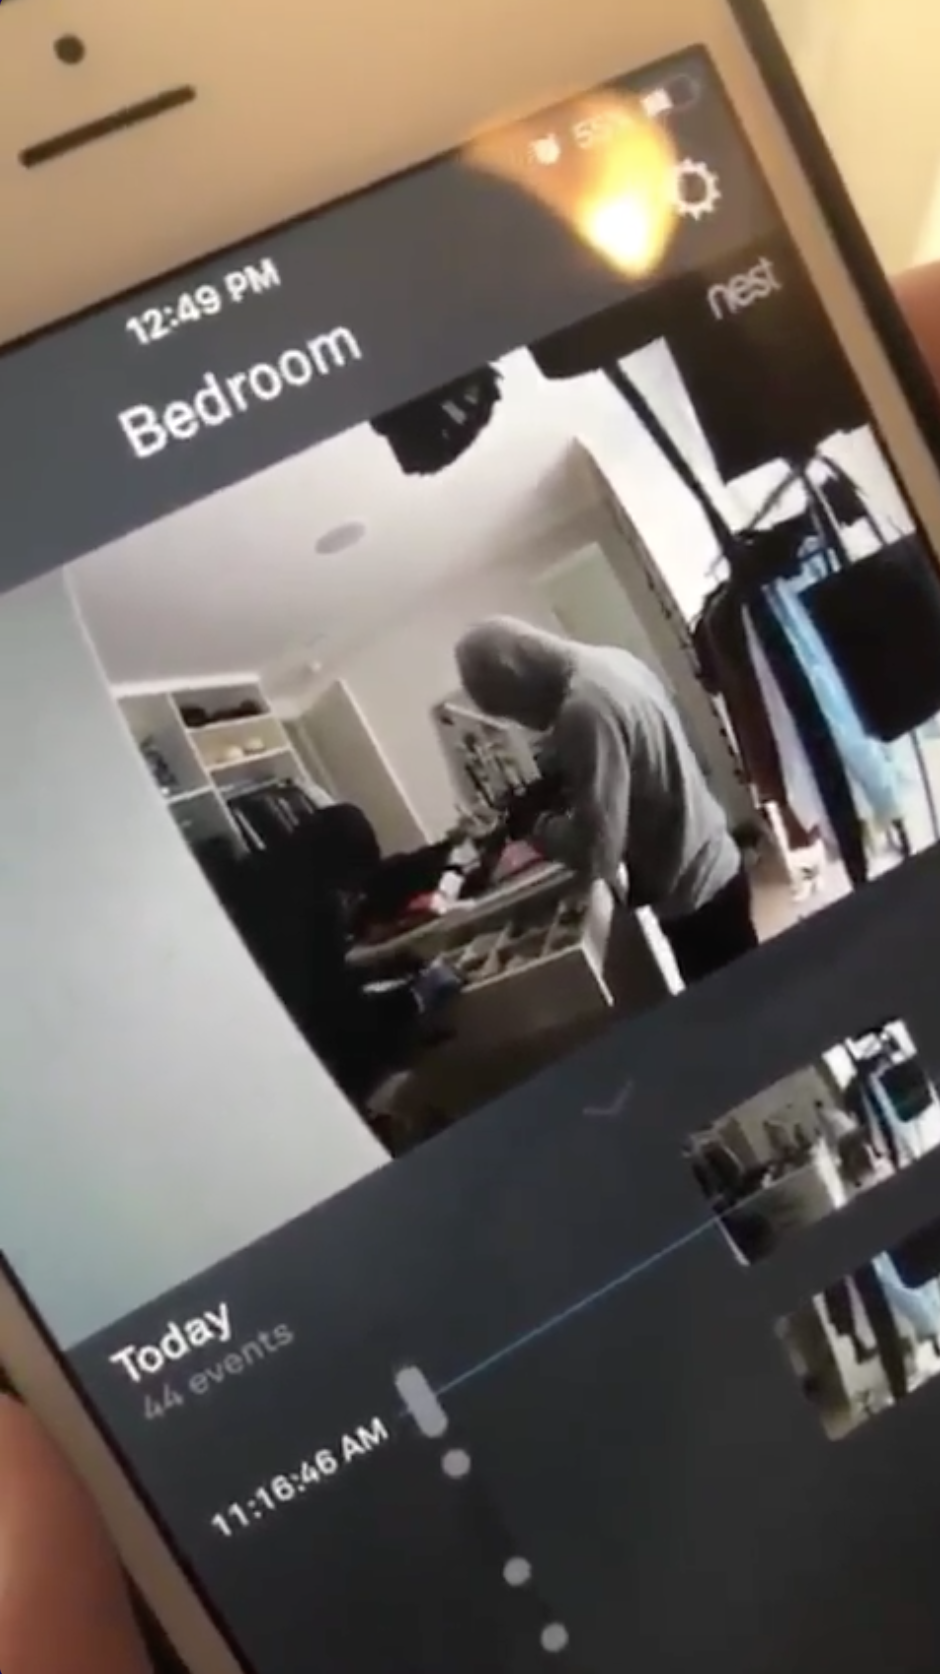 Celebrity hairstylist Jen Atkin witnessed a burglary in her own home on Friday, Oct. 27, via security cameras and posted her commentary about it on social media. (Photo: Instagram)